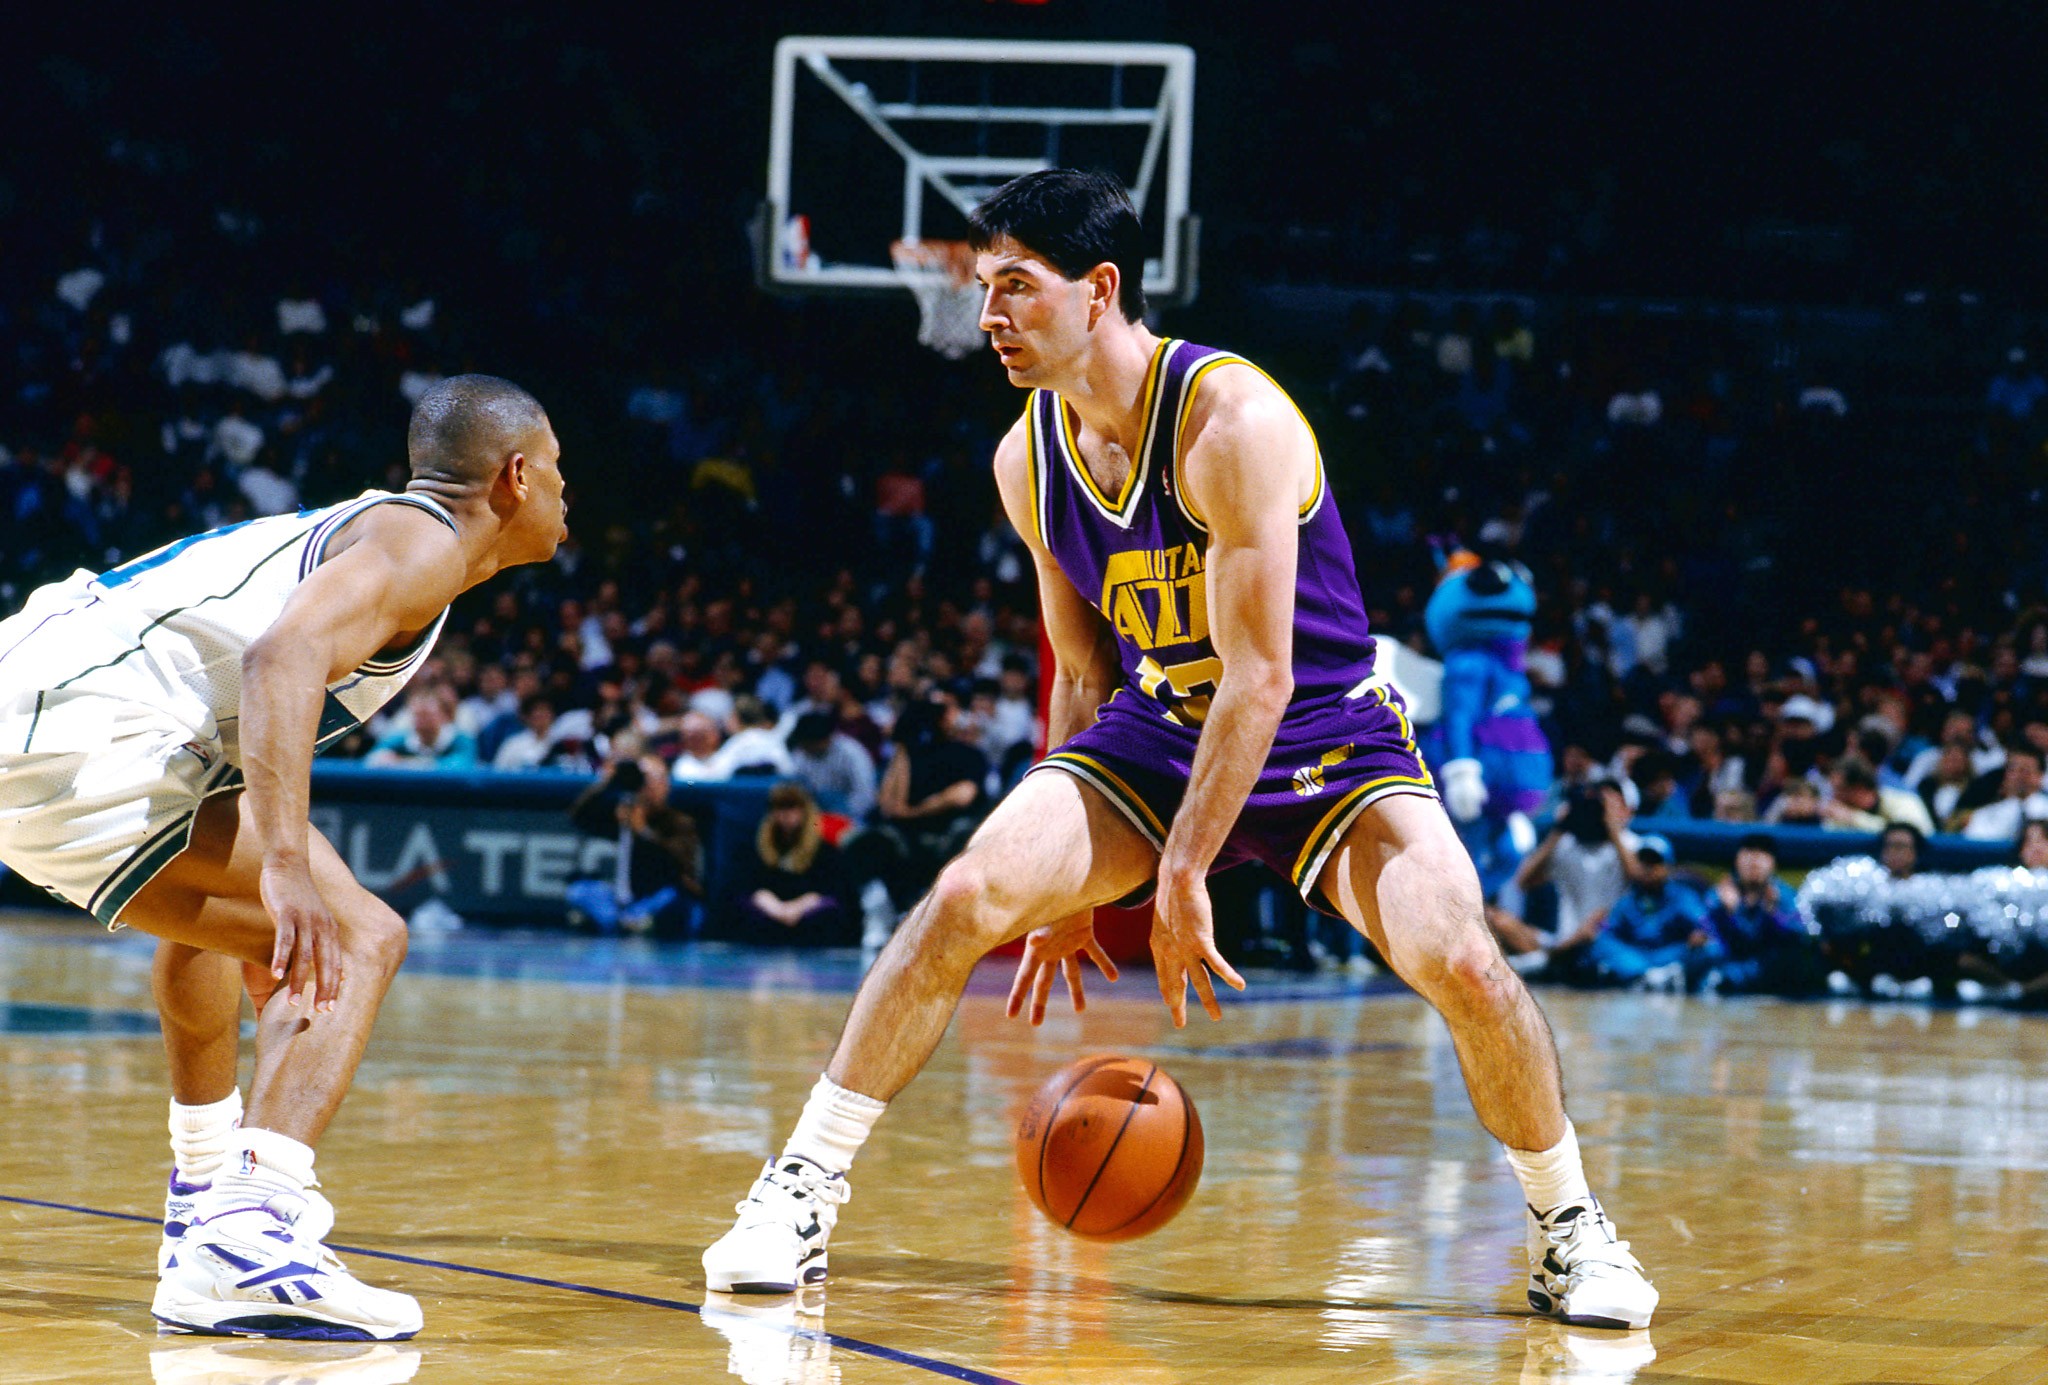 Ranking the Bottom 10 sneakers in NBA history - ESPN